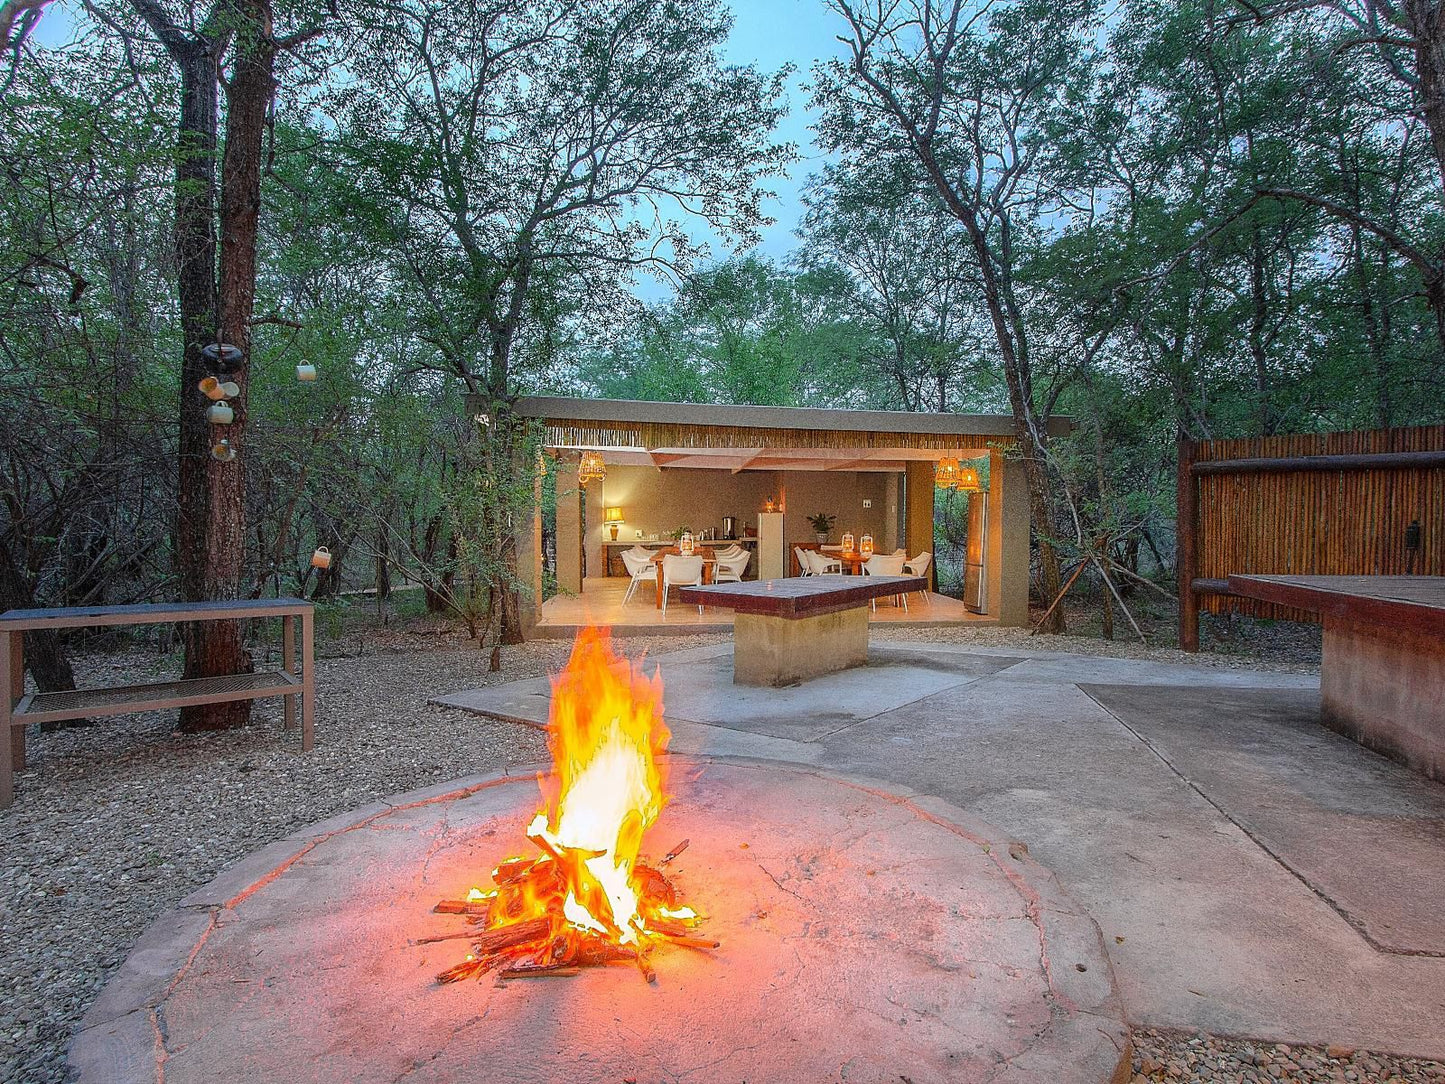 Maqueda Lodge Marloth Park Mpumalanga South Africa Cabin, Building, Architecture, Fire, Nature